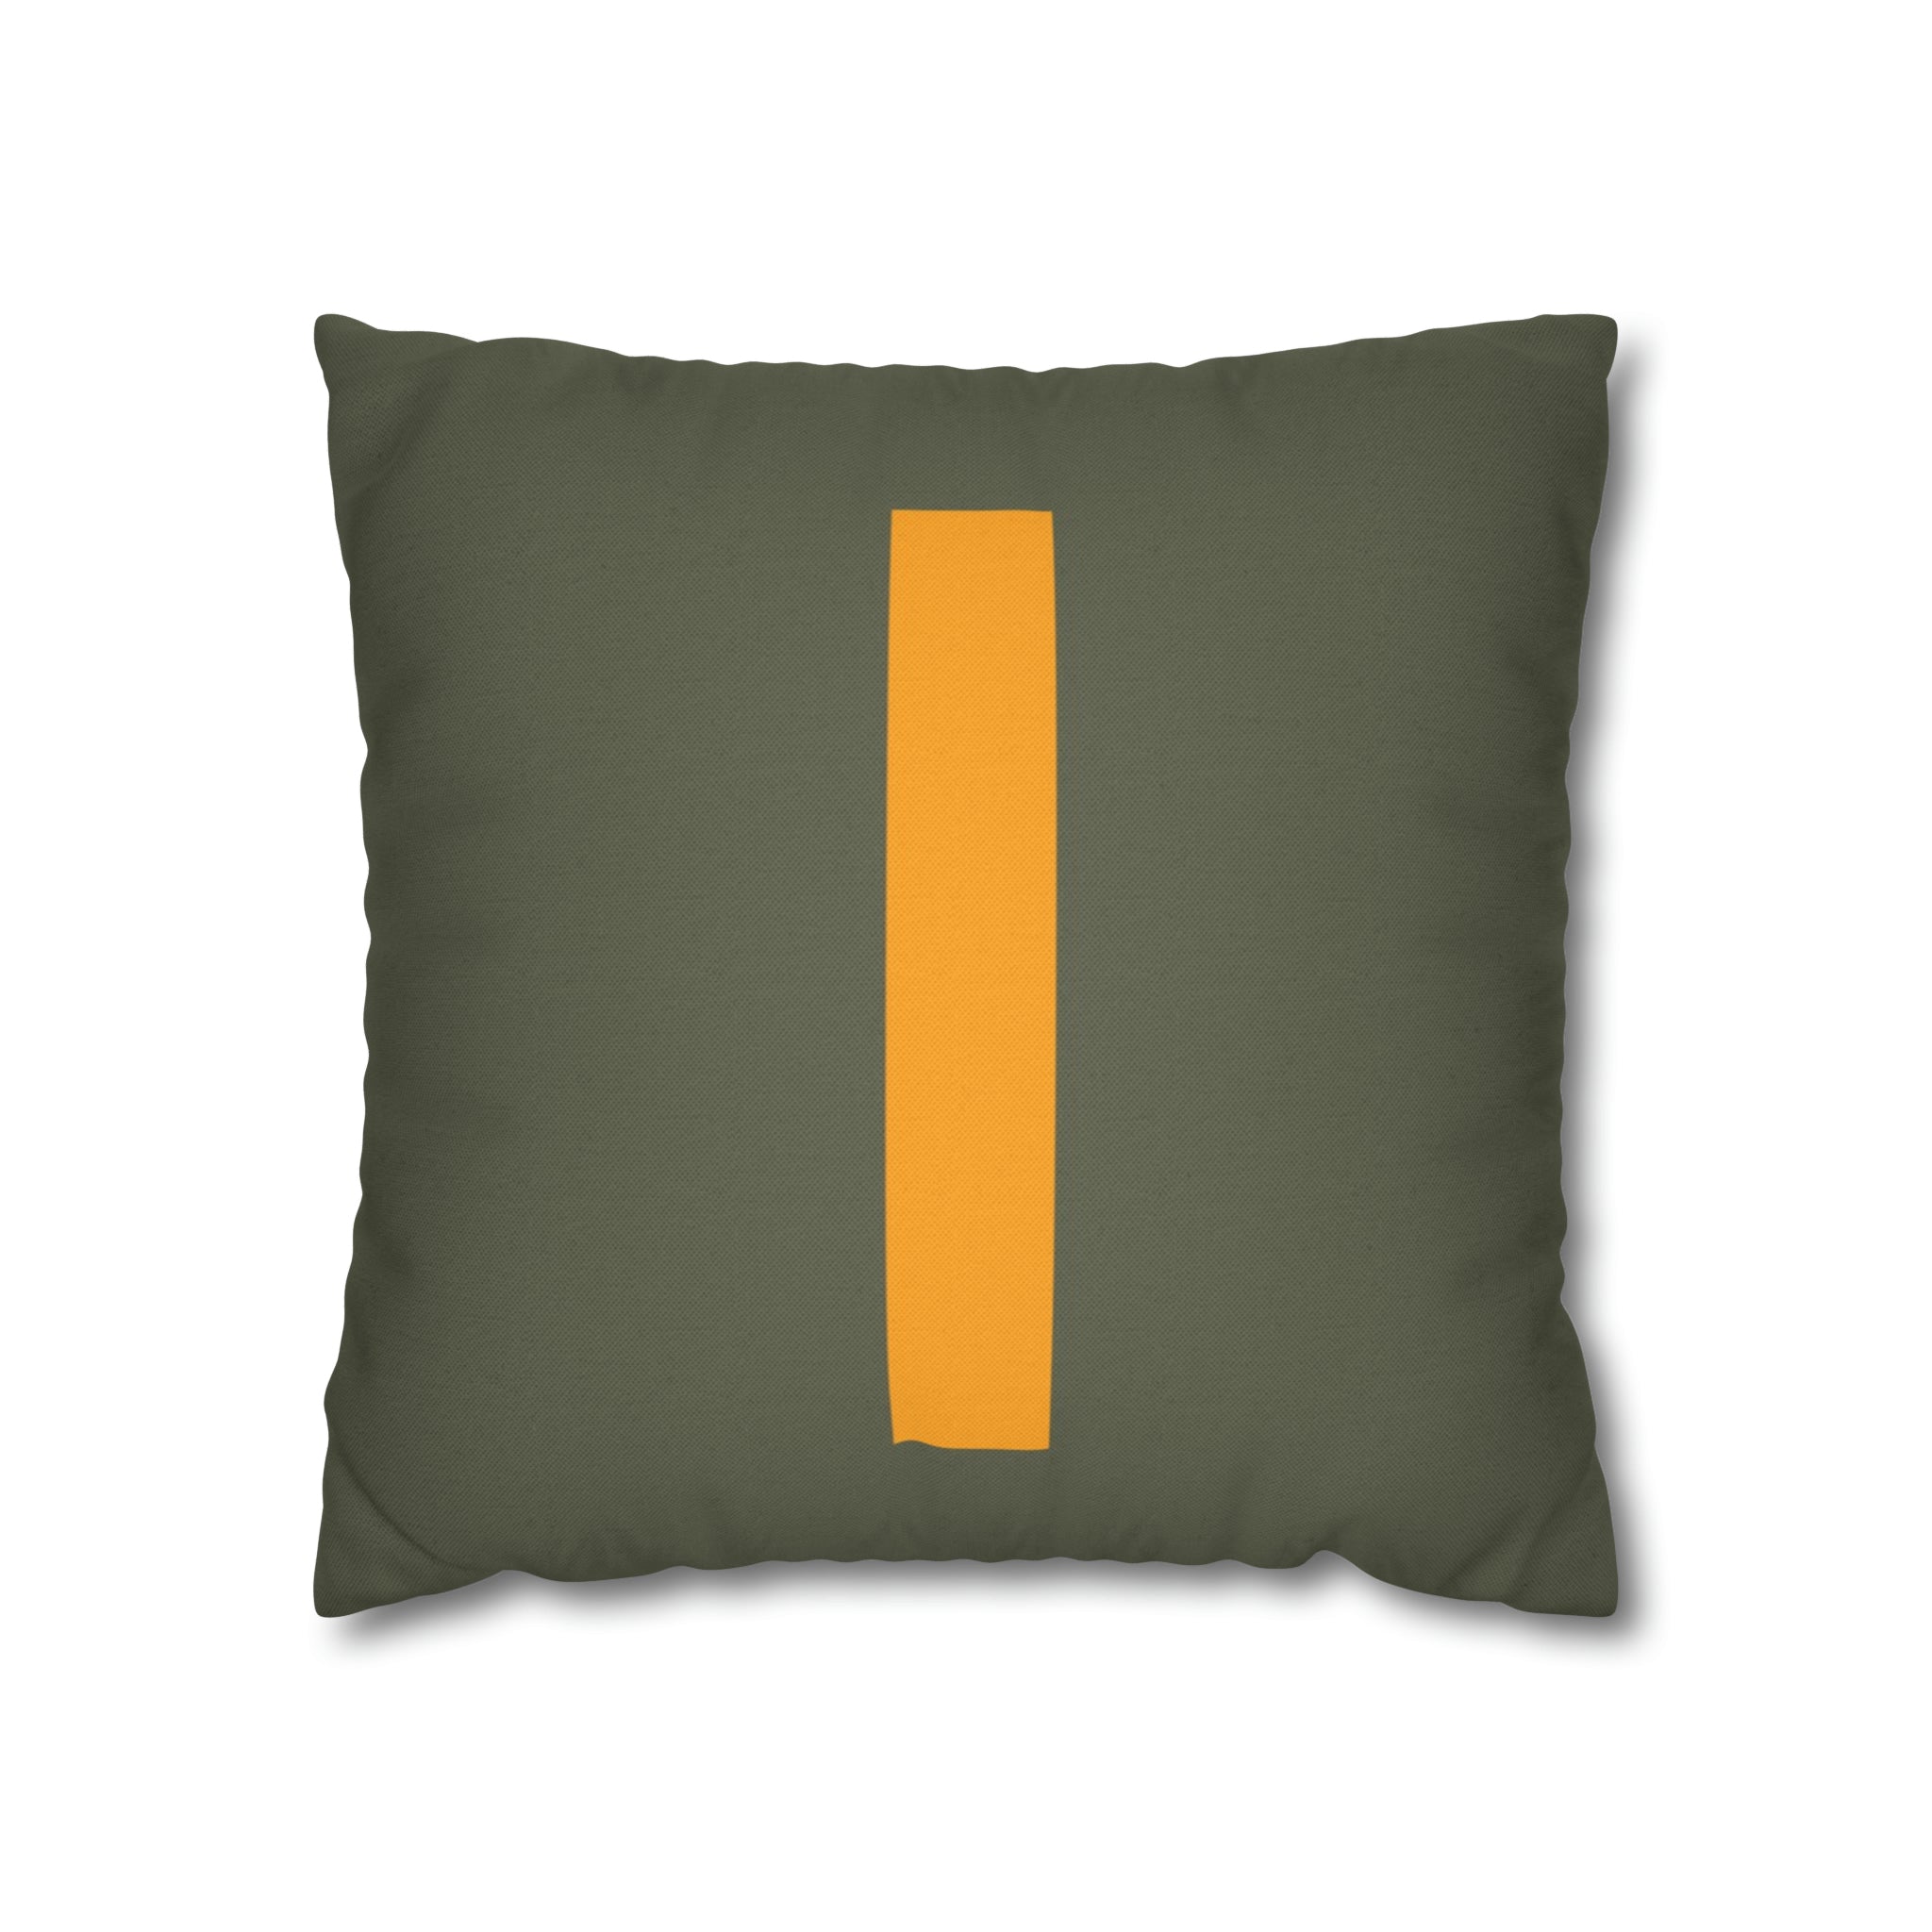 WWII USAAF Number "1" Square Pillowcase - I Love a Hangar